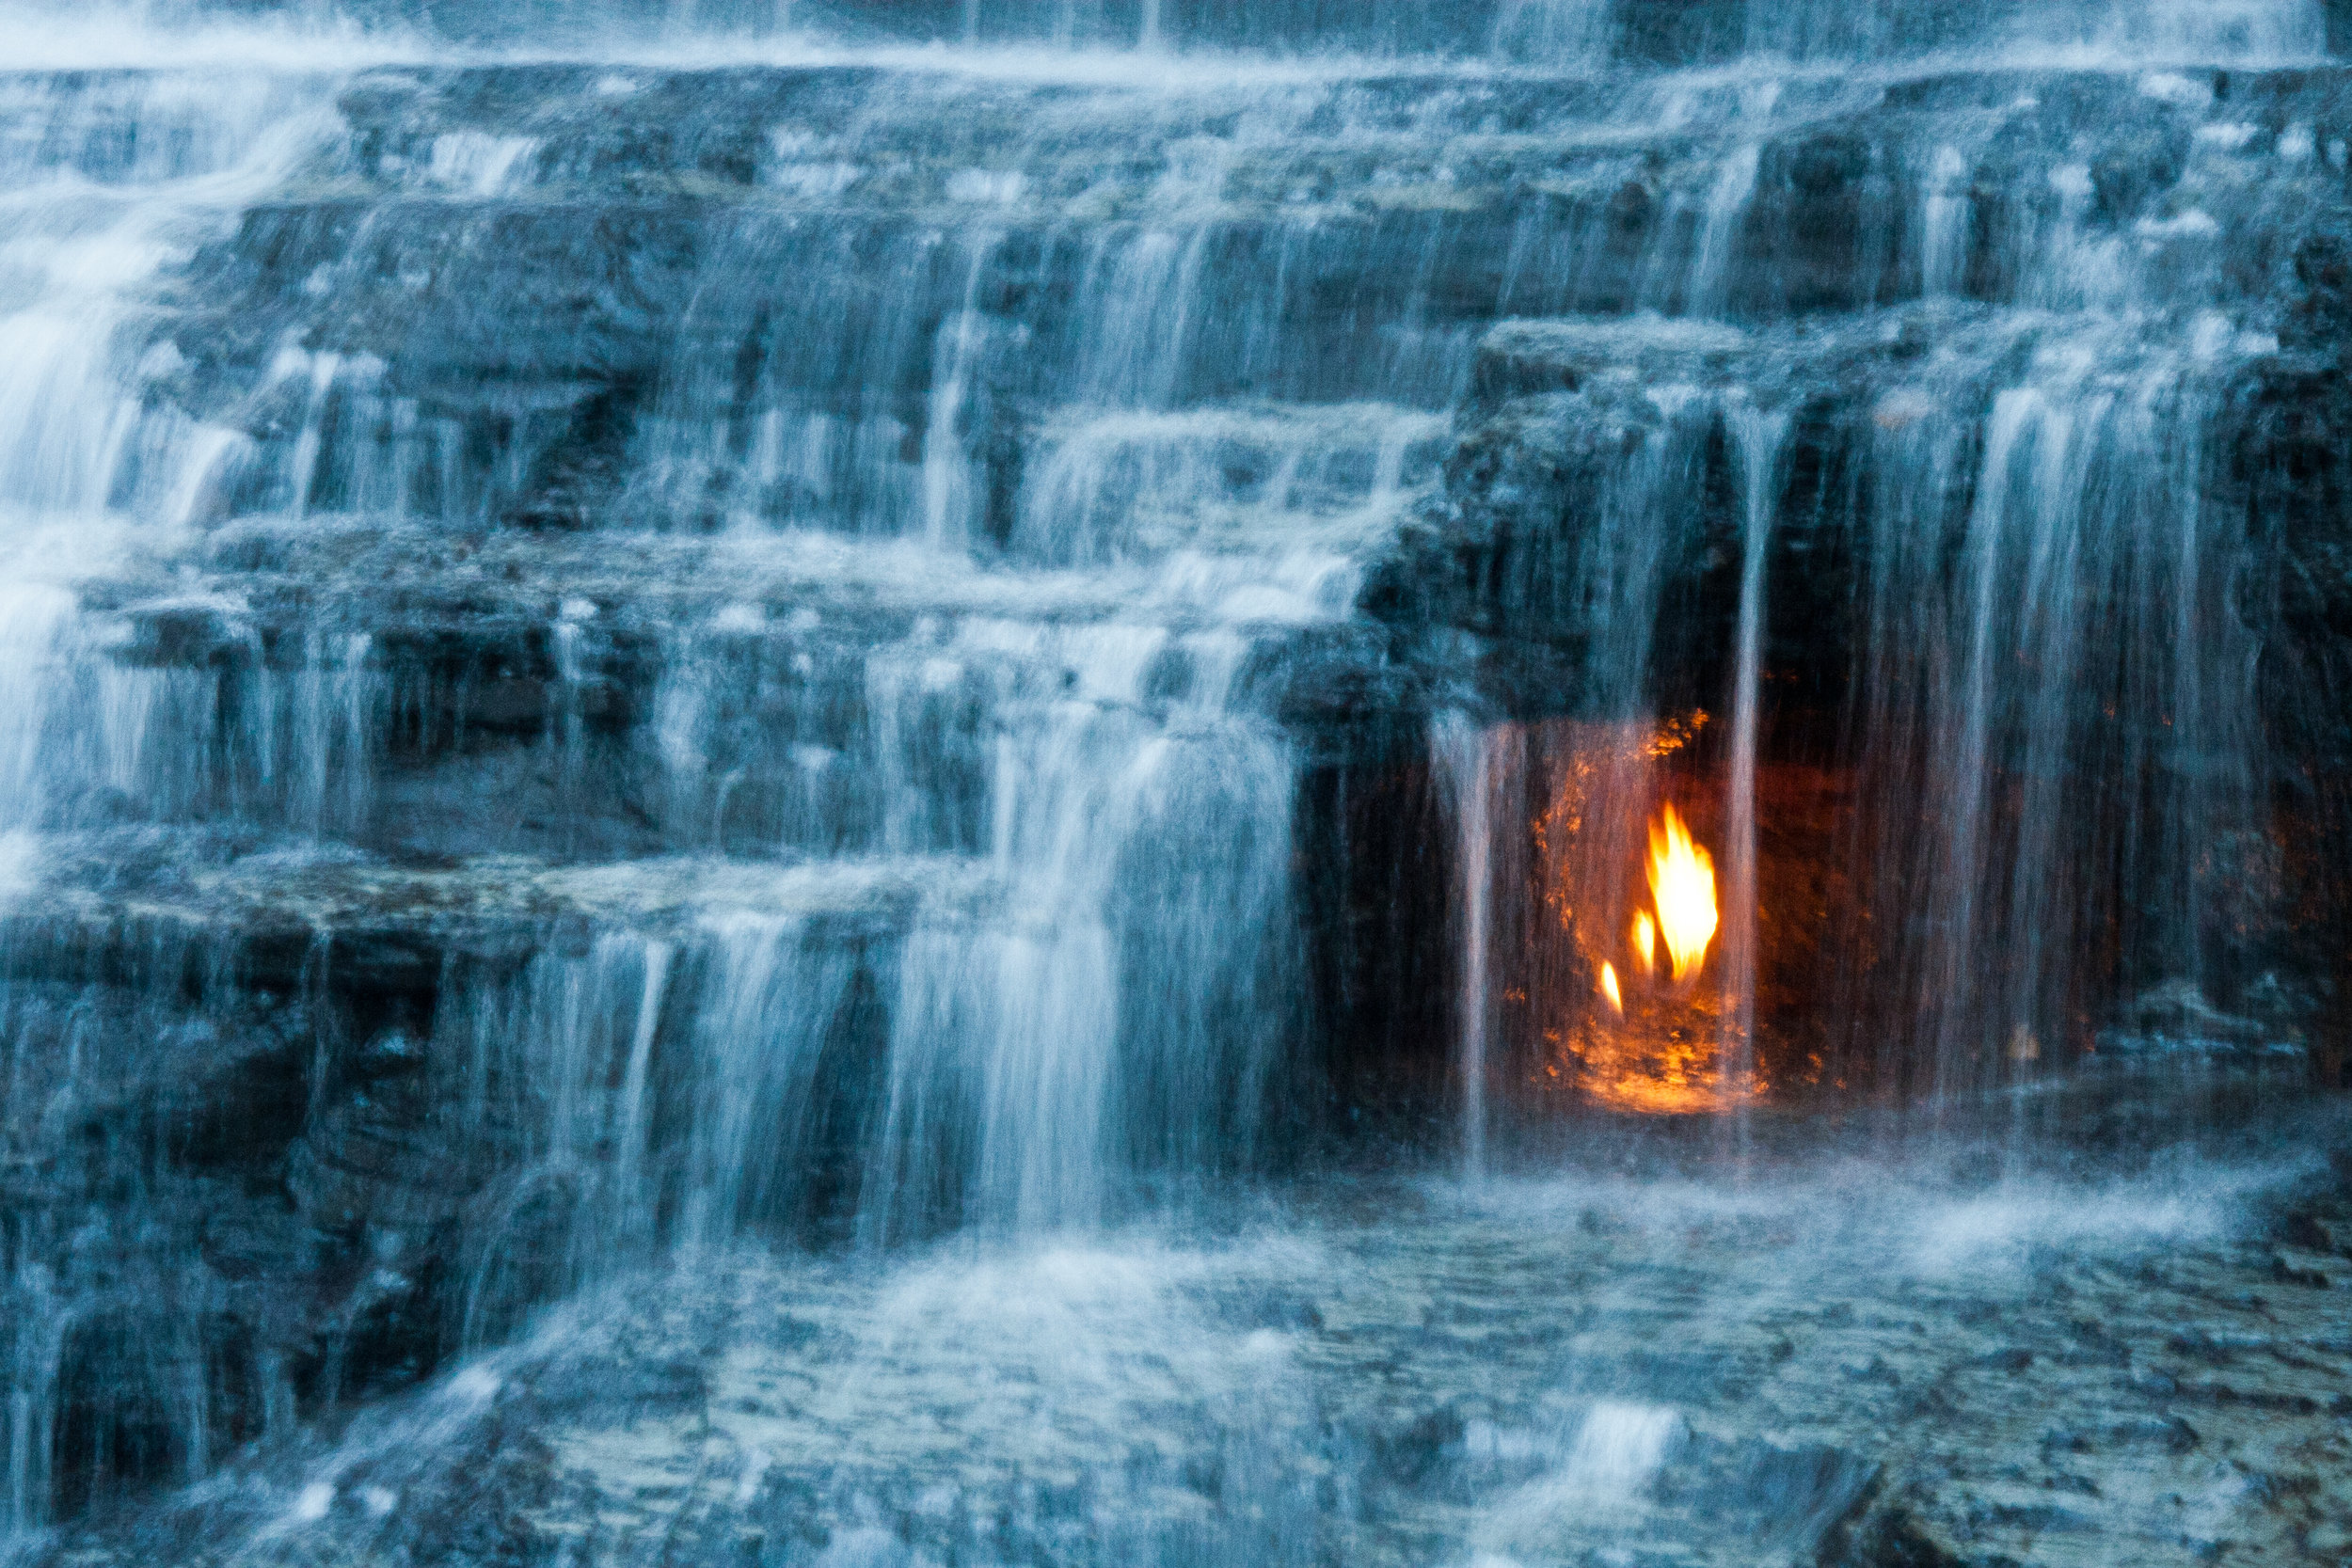 eternal flame song meaning